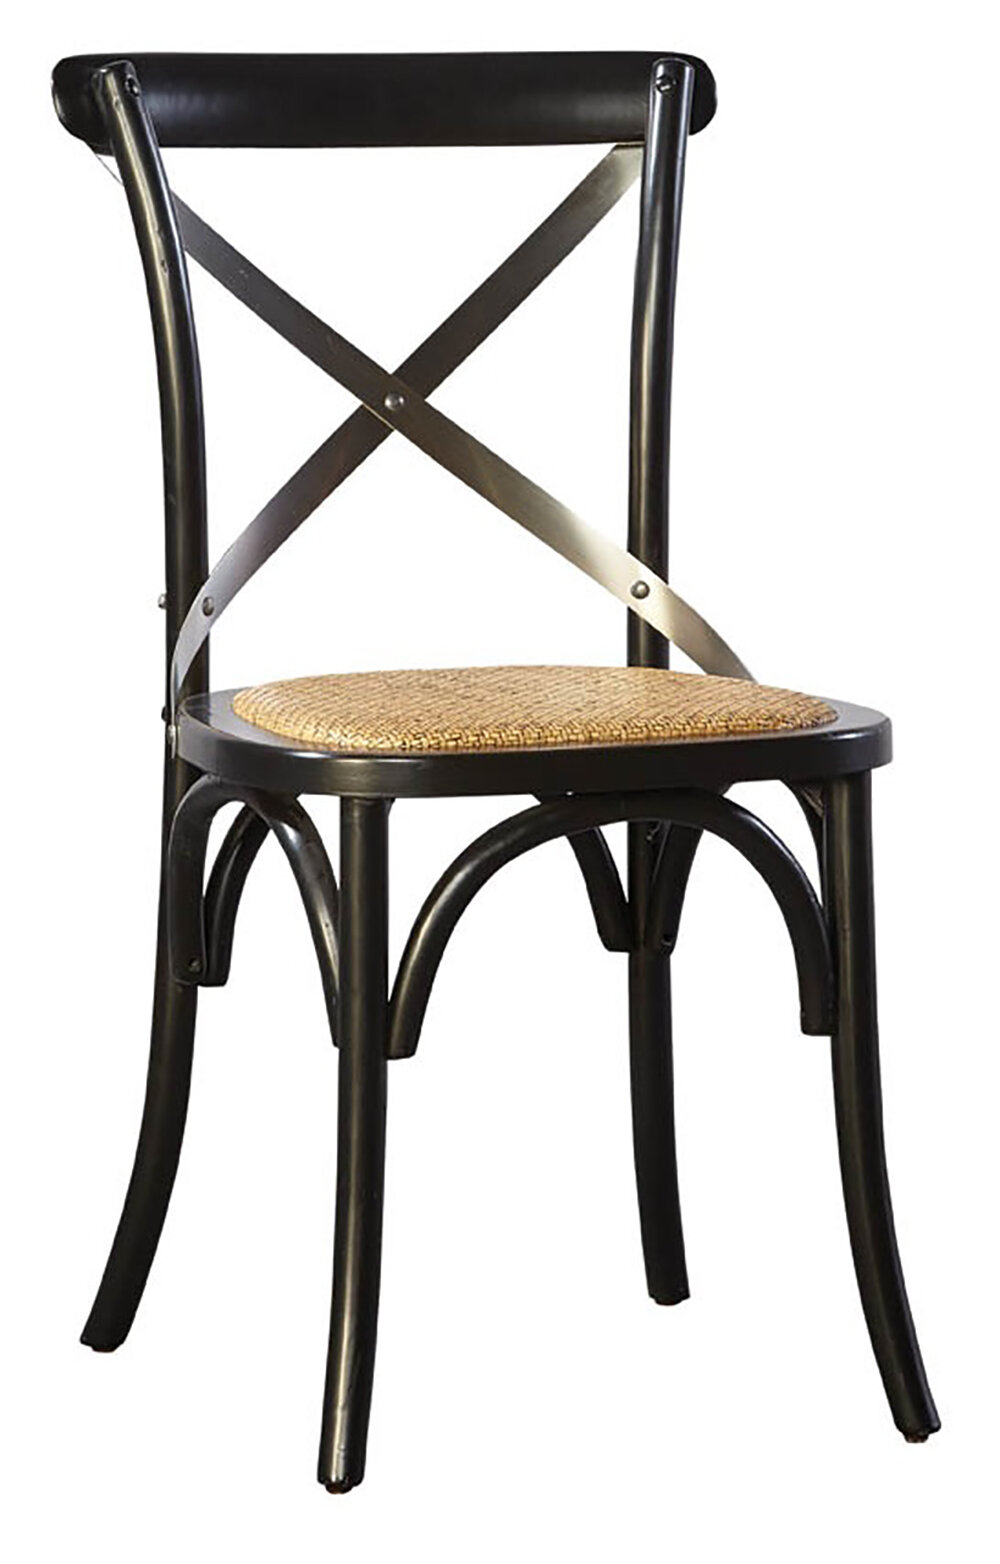 BENTWOOD DISTRESSED AGED OAK CHAIR DINING CHAIR WITH METAL CROSS BACK